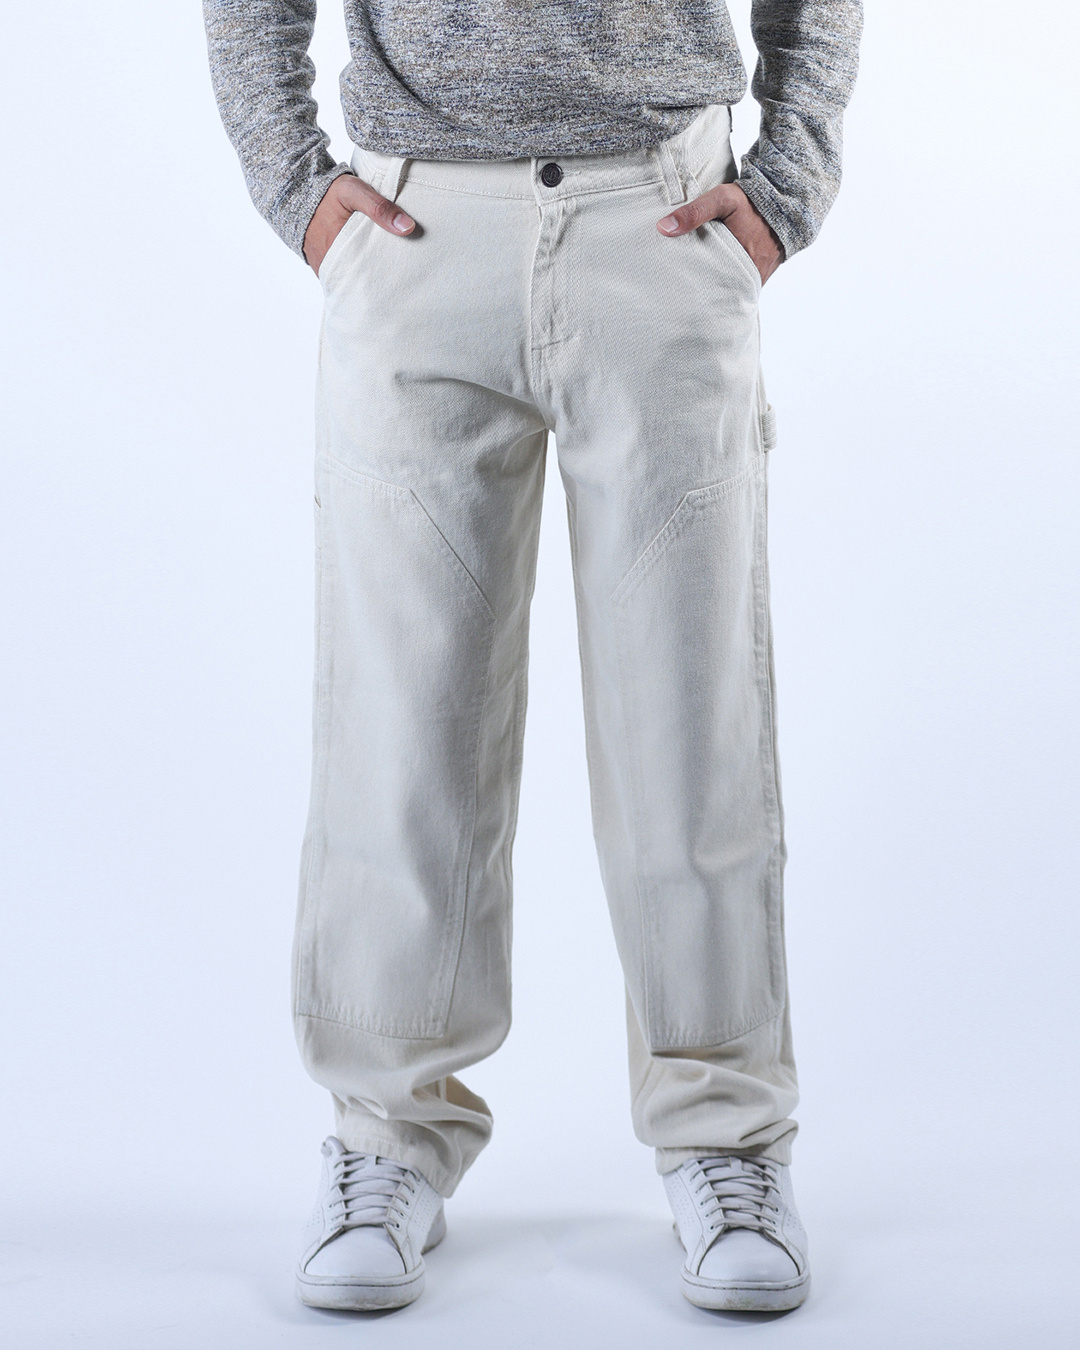 Buy Men's White Relaxed Fit Carpenter Jeans Online at Bewakoof